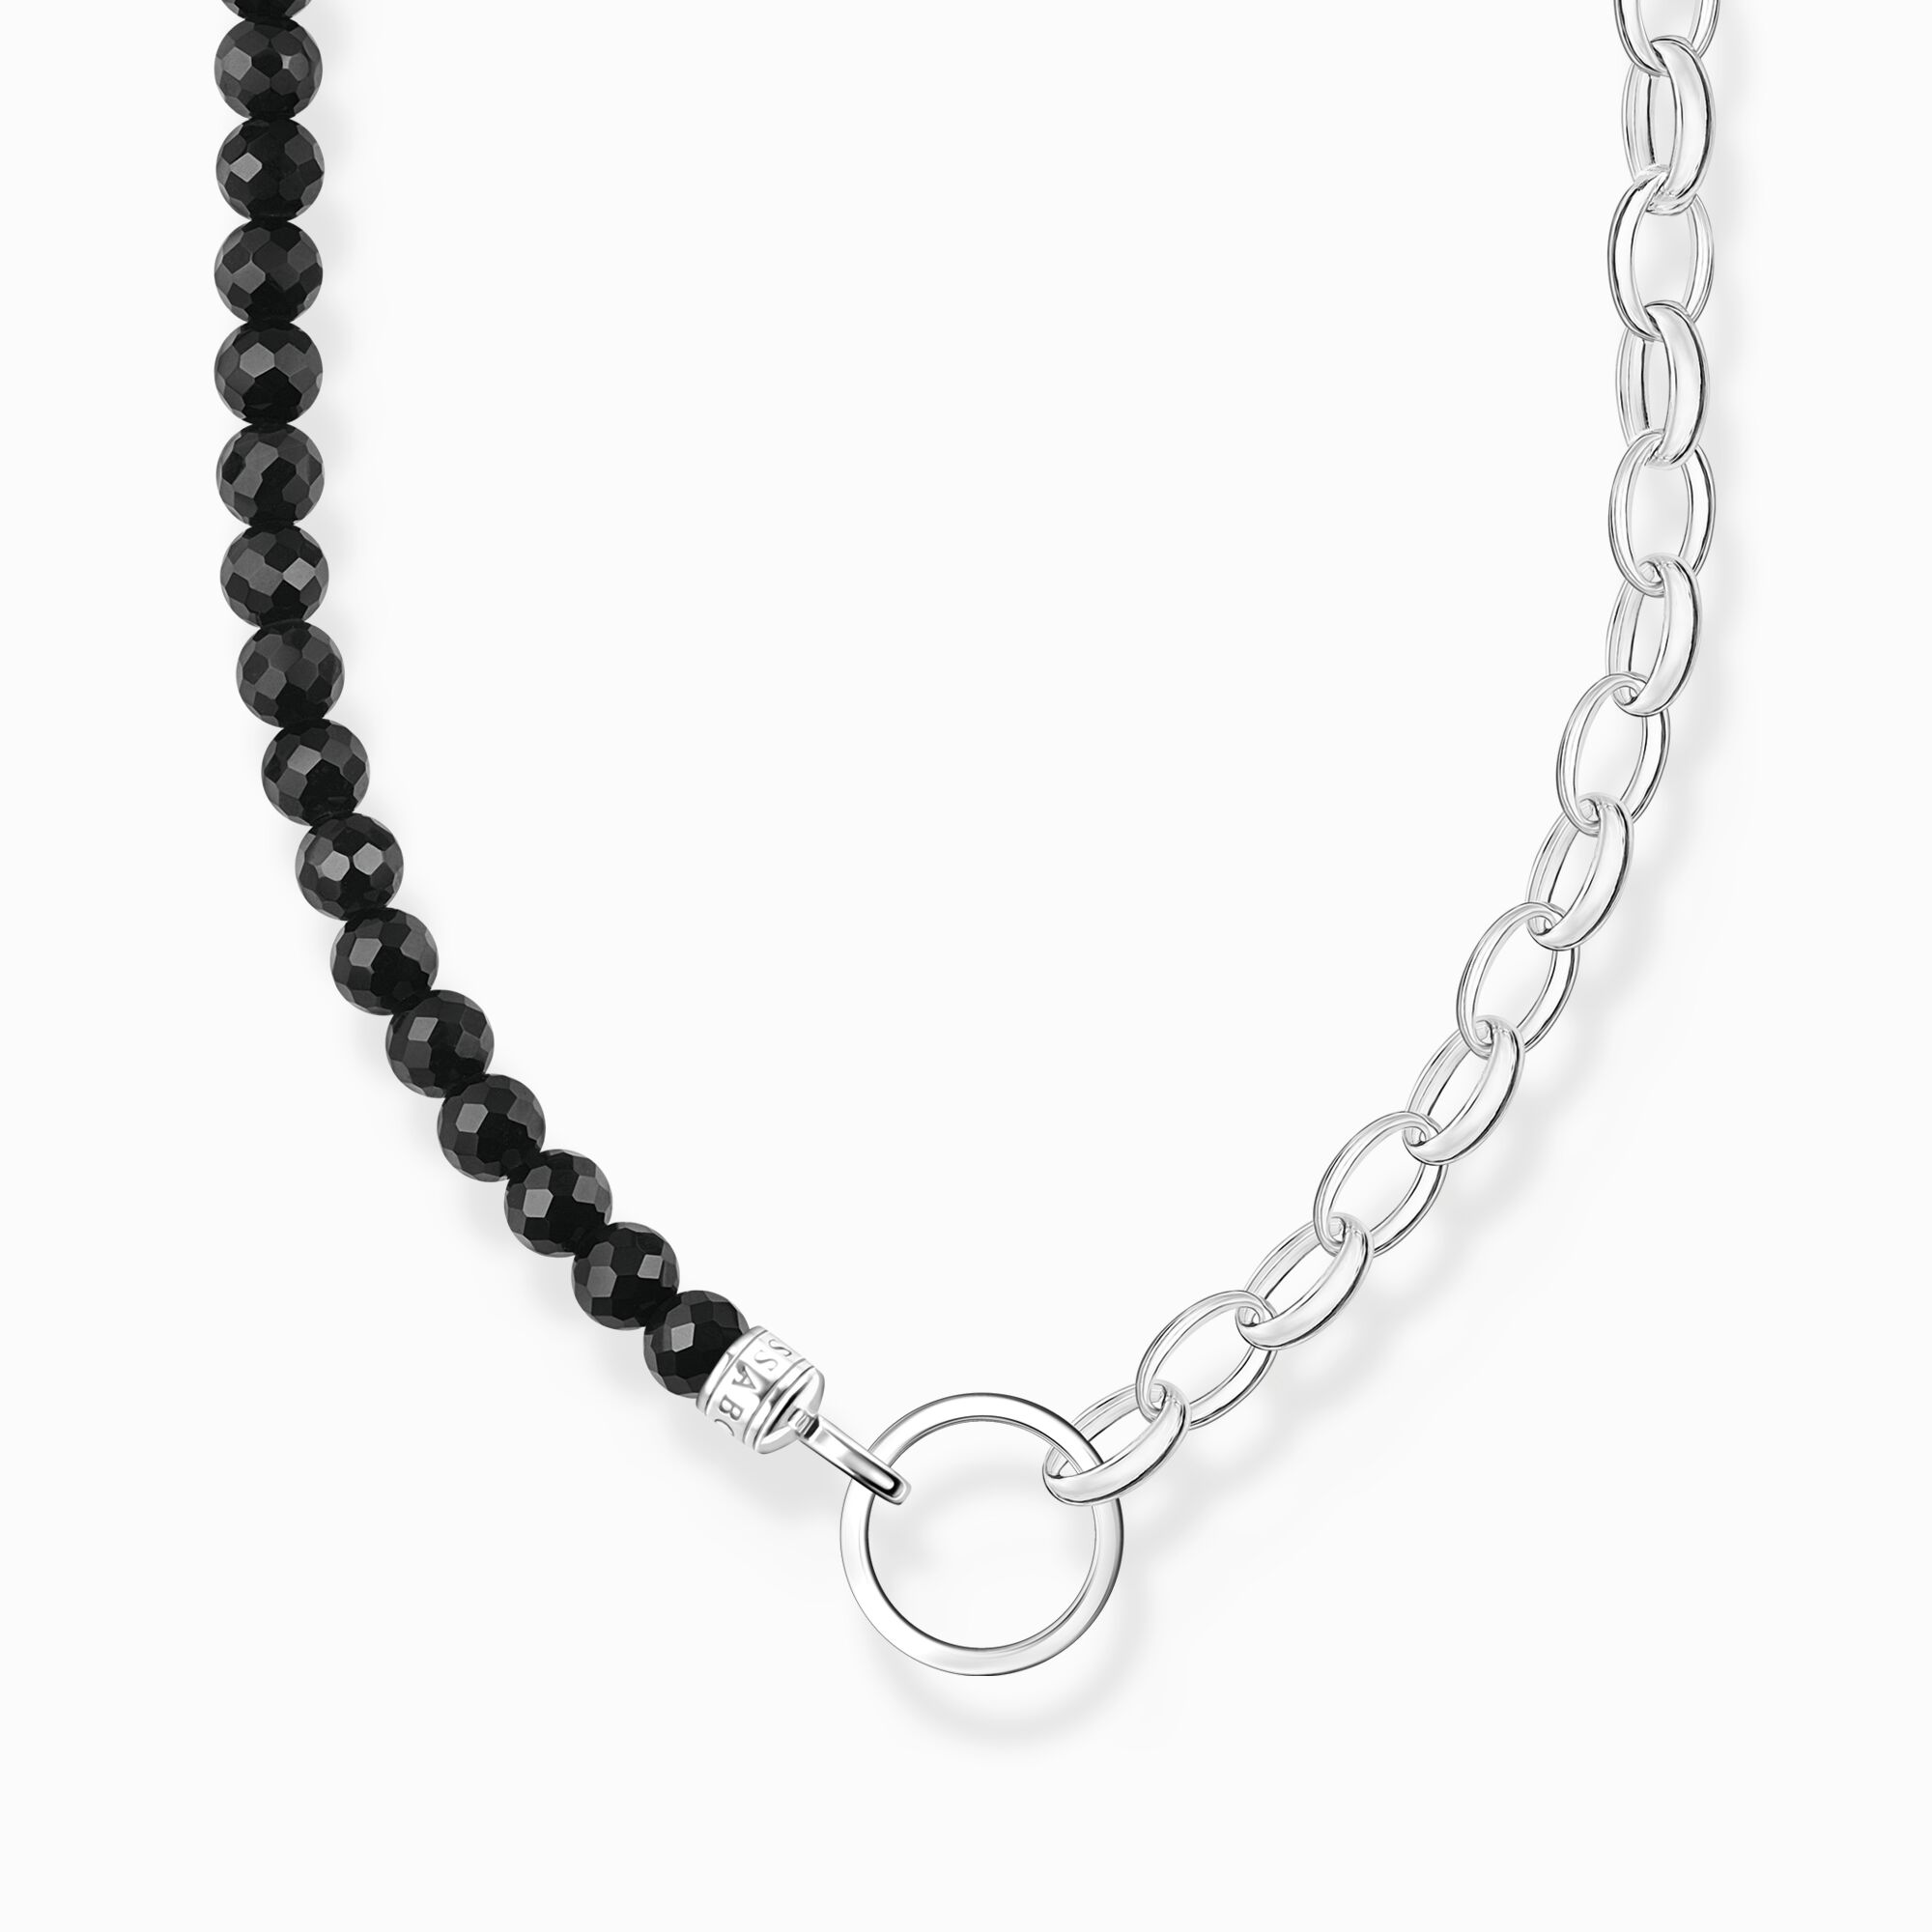 Charm necklace with black onyx beads and chain links silver from the Charm Club collection in the THOMAS SABO online store